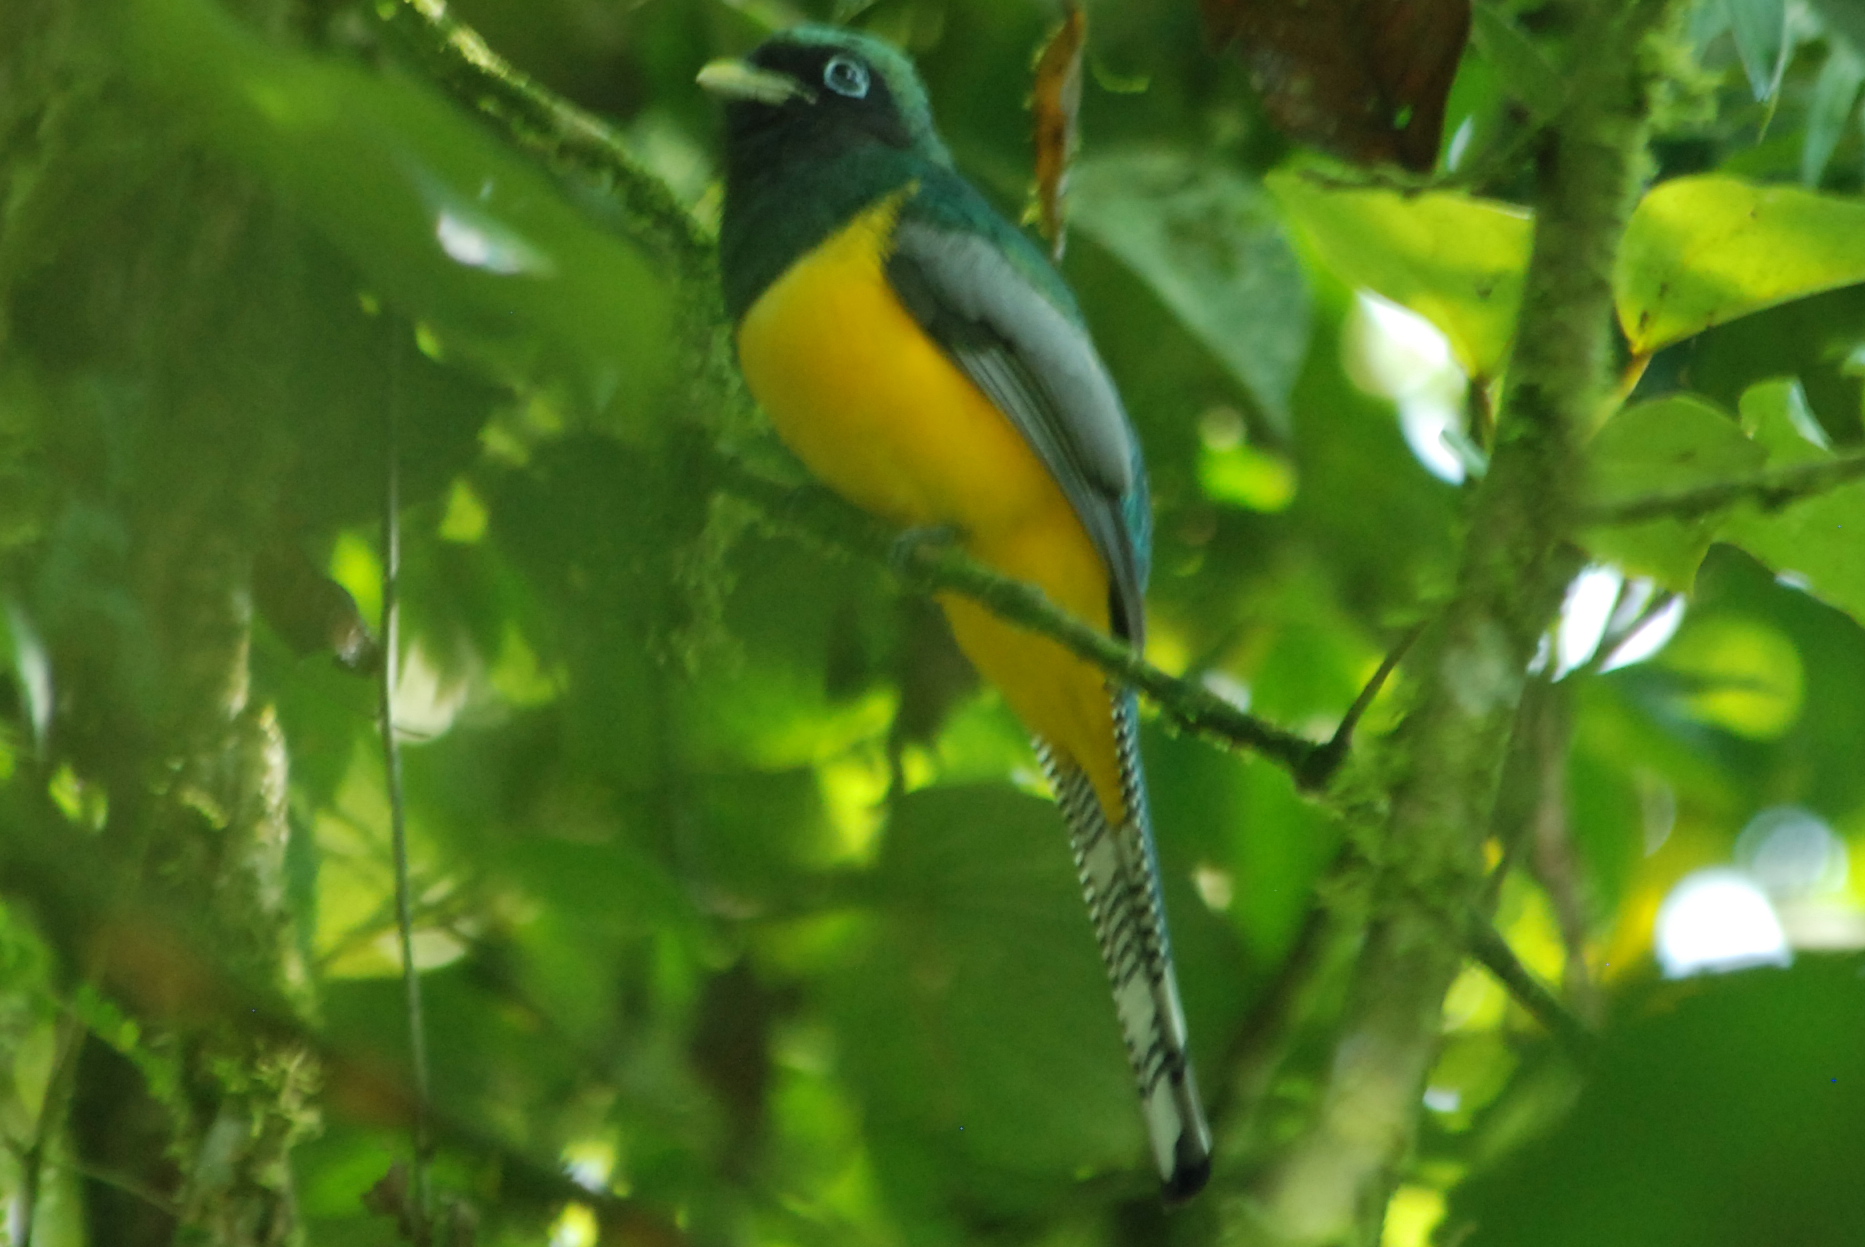 Click picture to see more Black-throated Trogons.